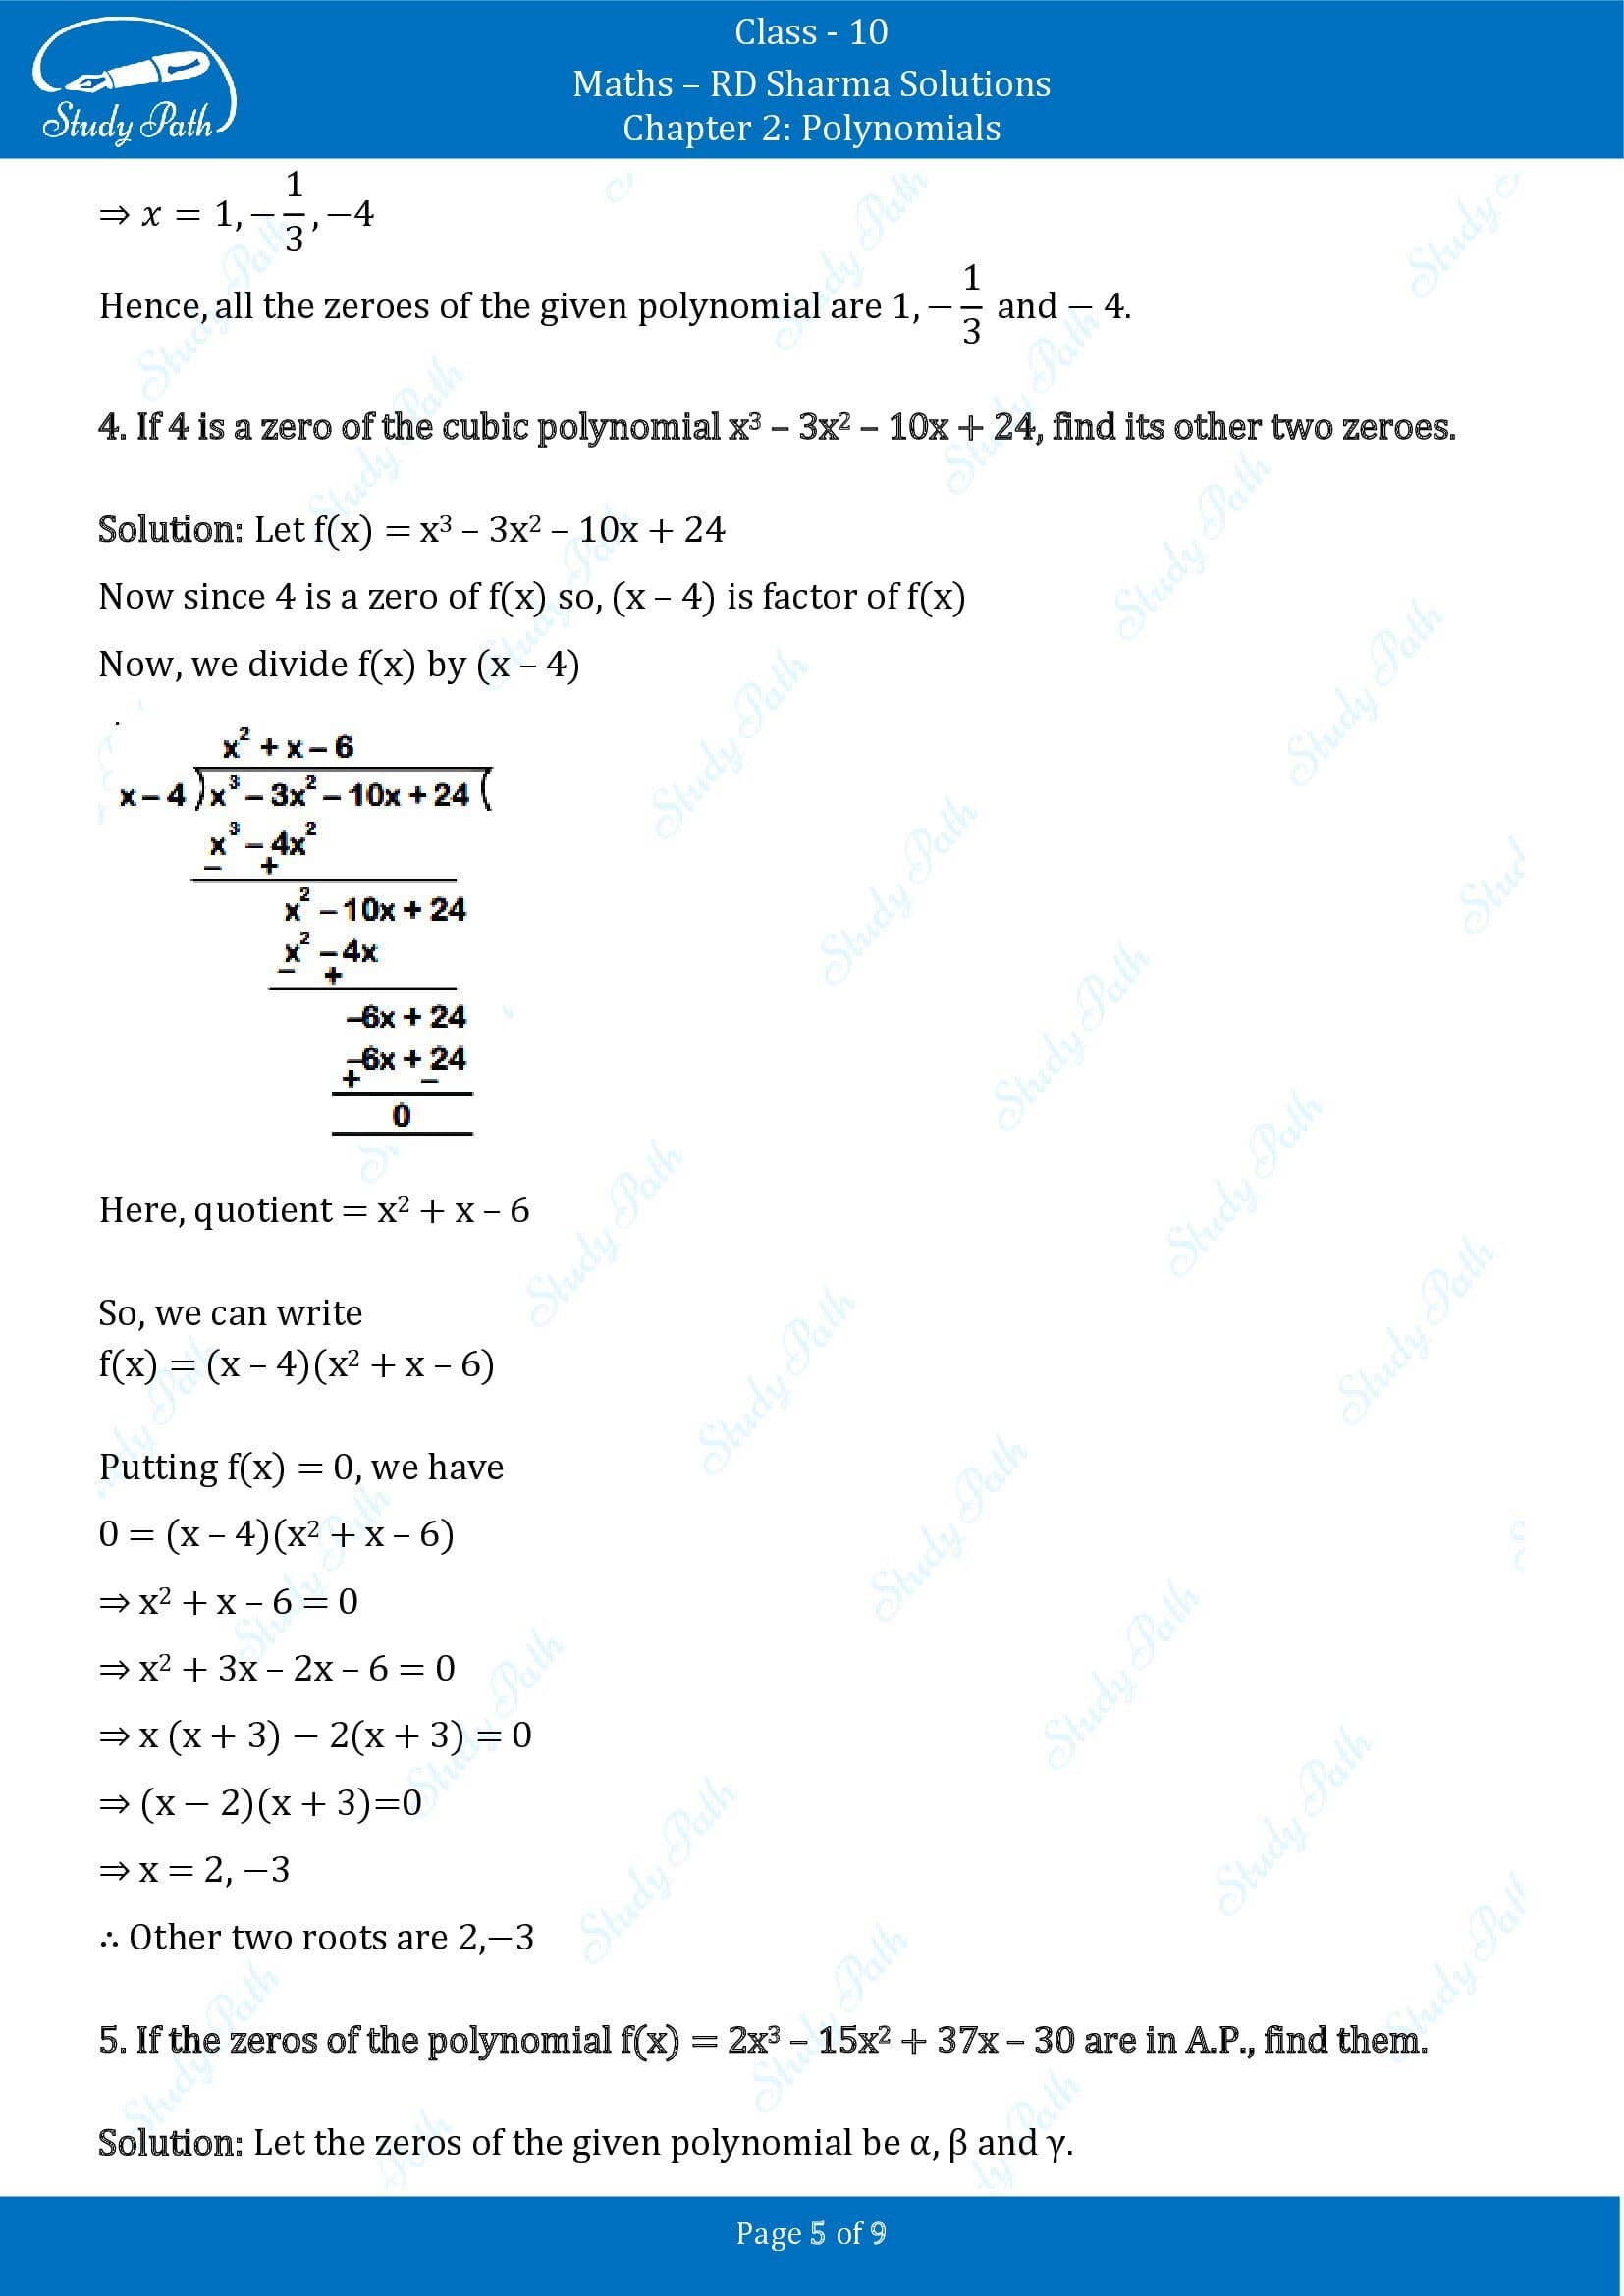 RD Sharma Solutions Class 10 Chapter 2 Polynomials Exercise 2.2 00005